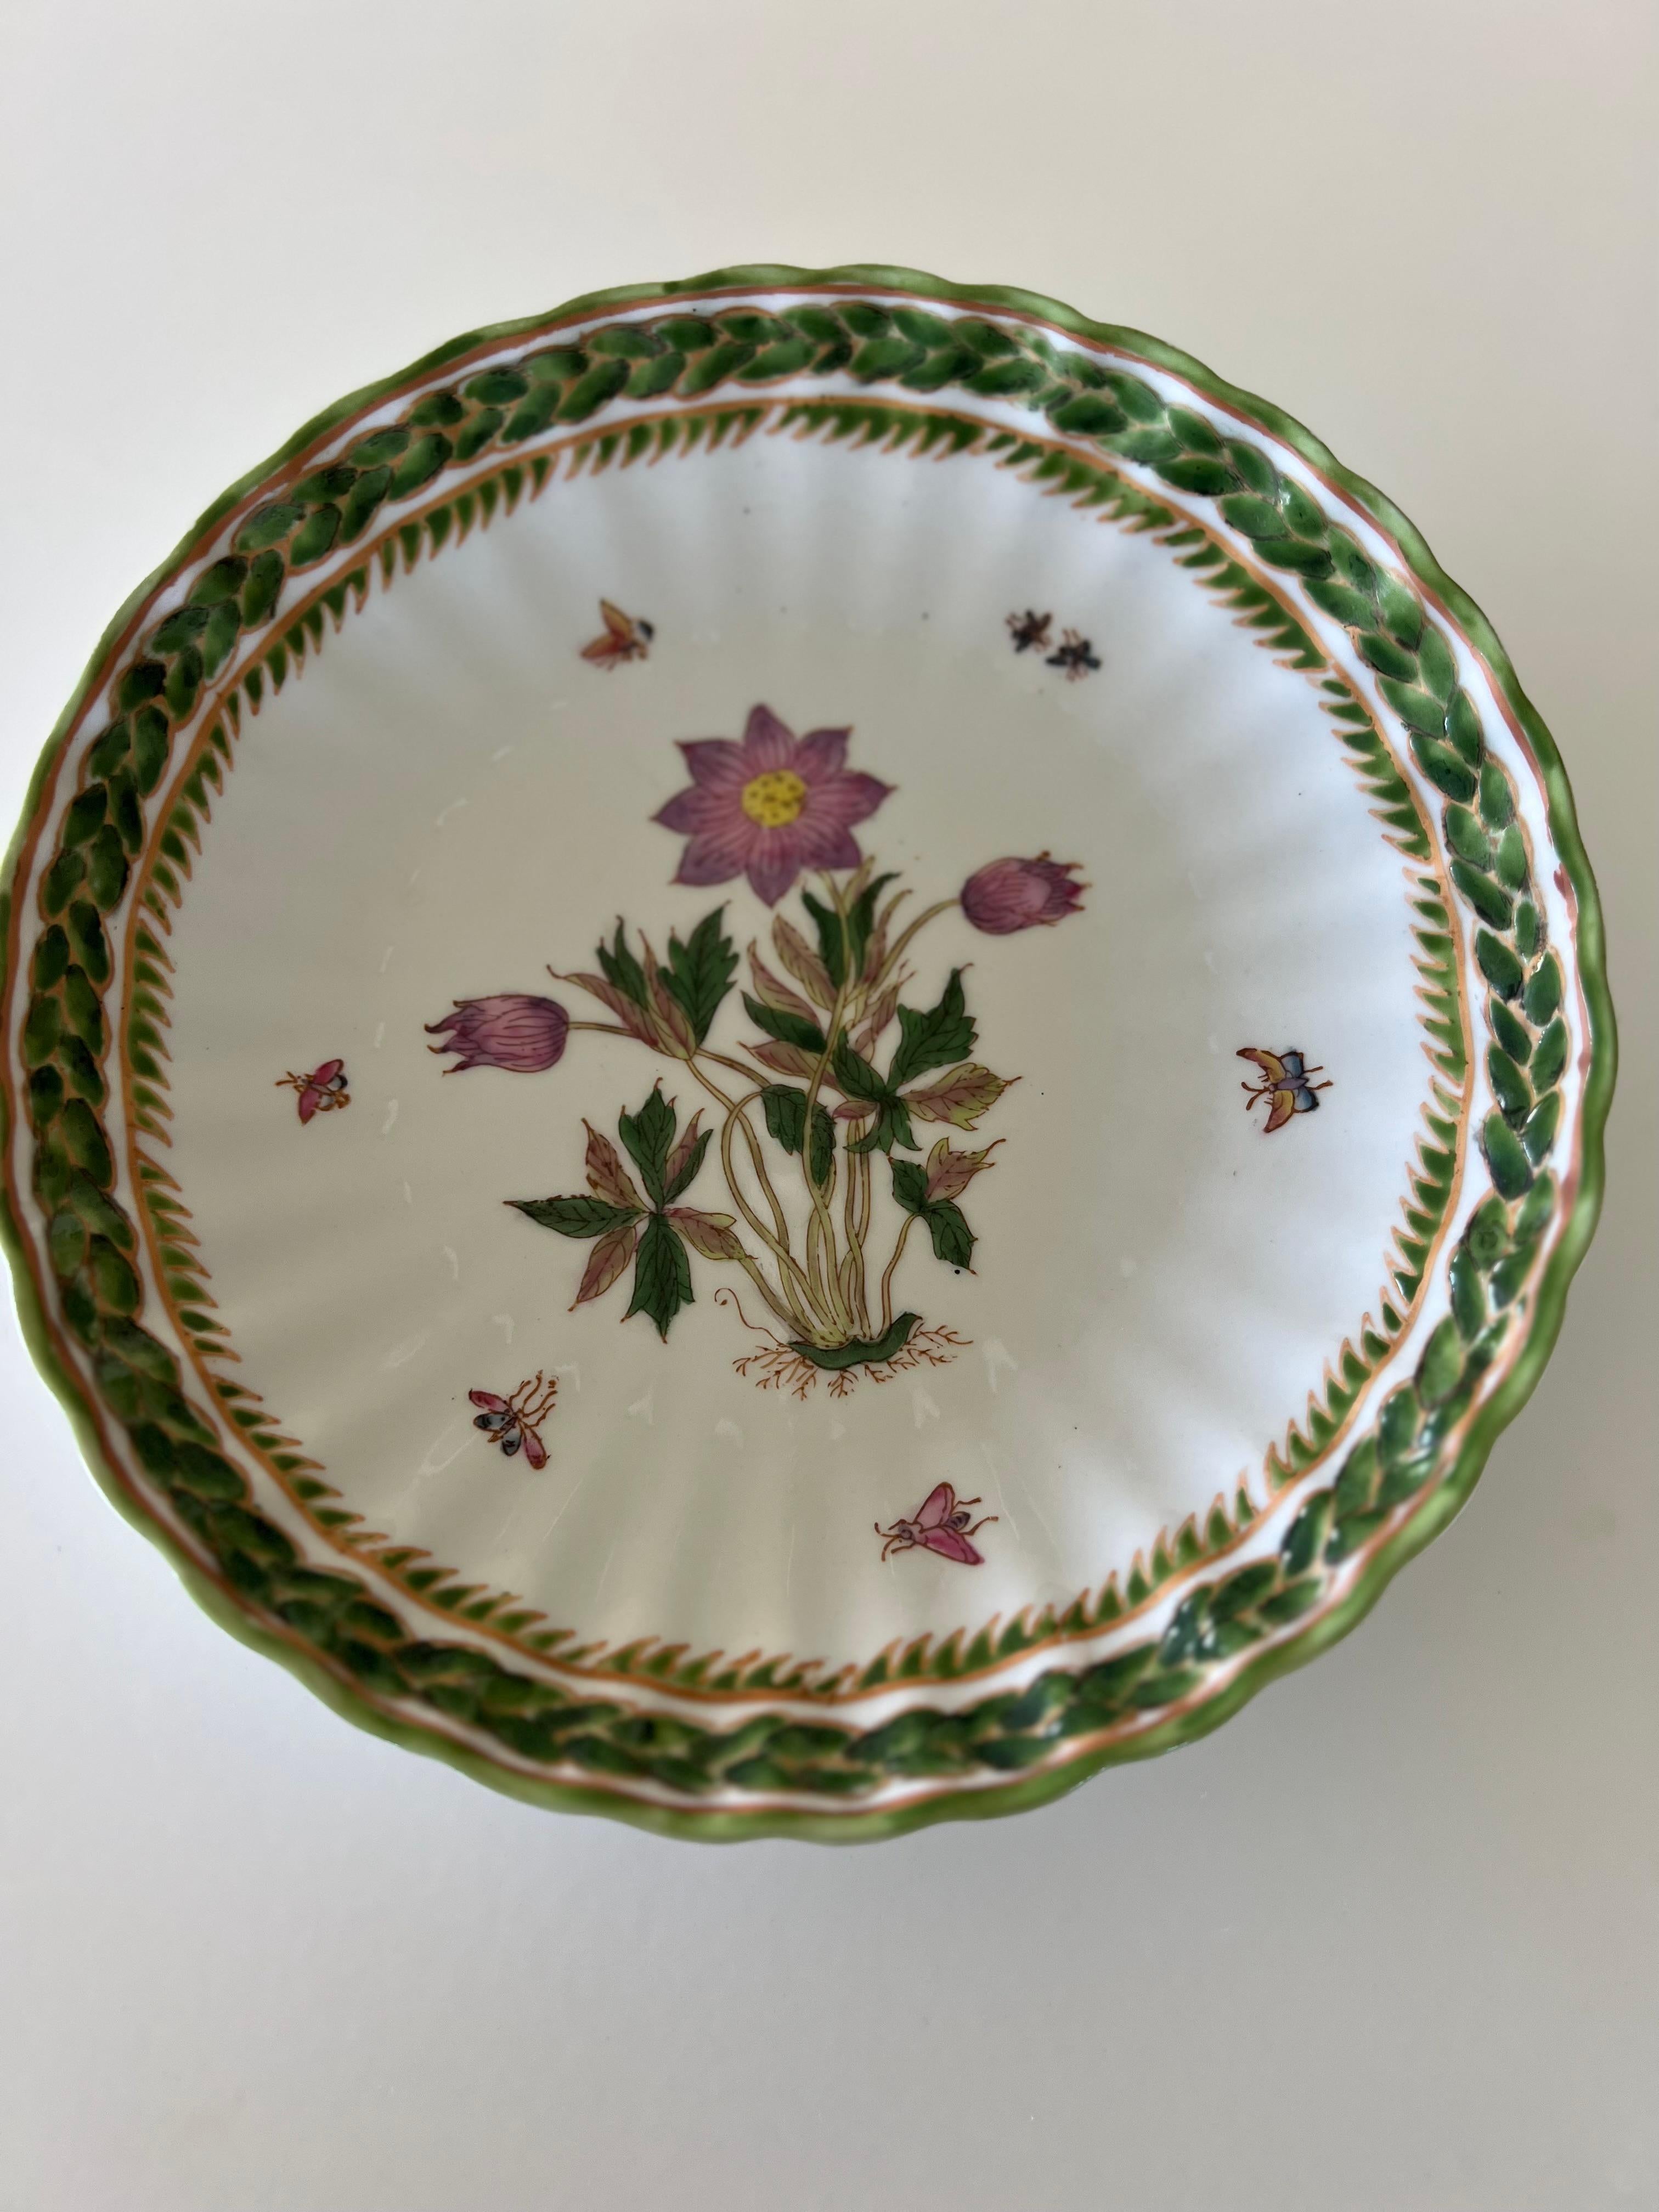 Ceramic Decorative Flower and Vegetation Chinese Plate Signed WL, 1896 For Sale 3